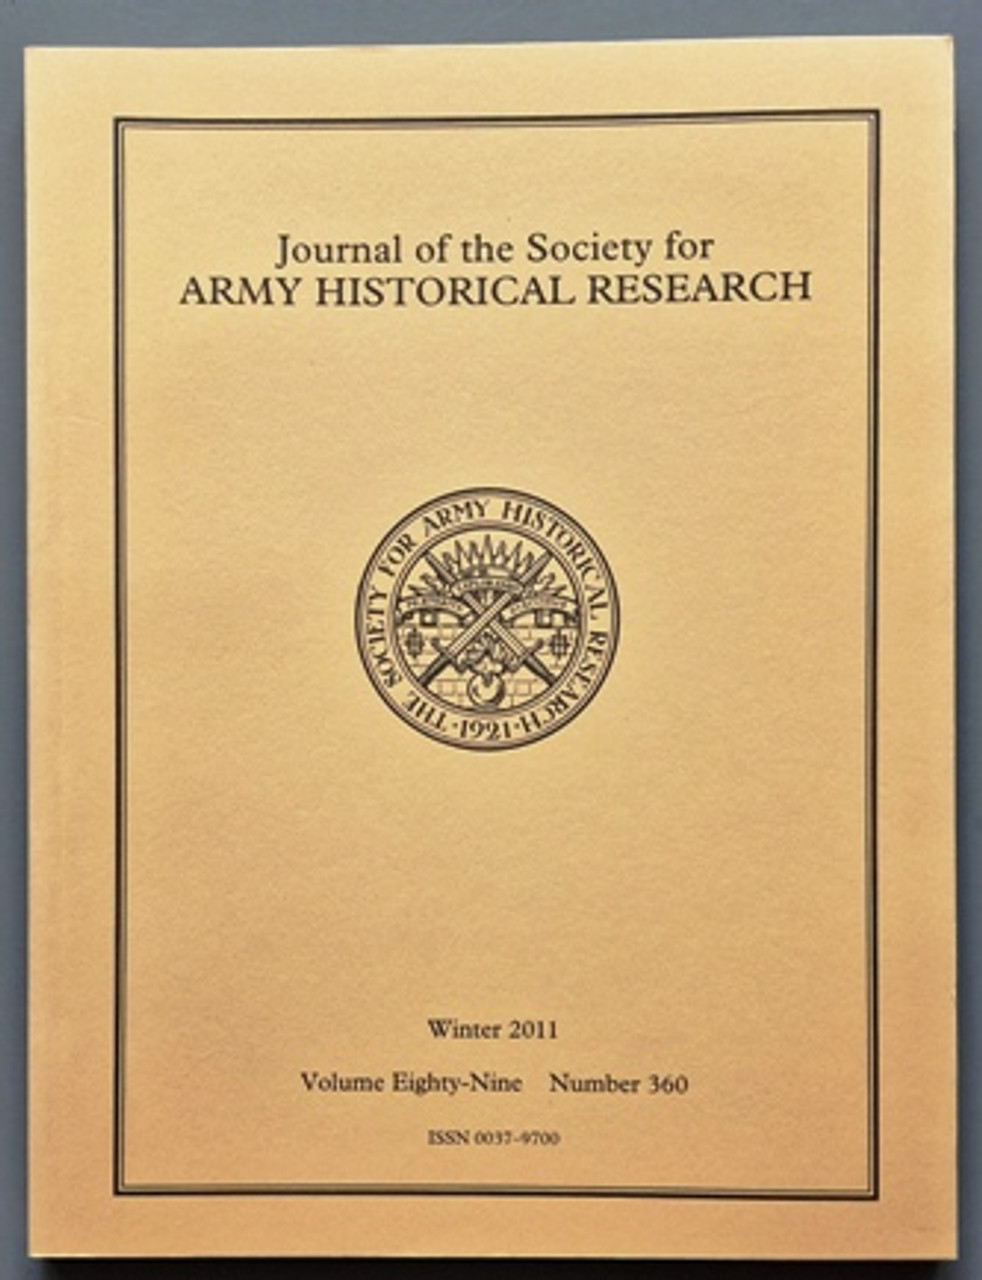 2011 (Winter Volume) Journal Of The Society For Army Historical Research